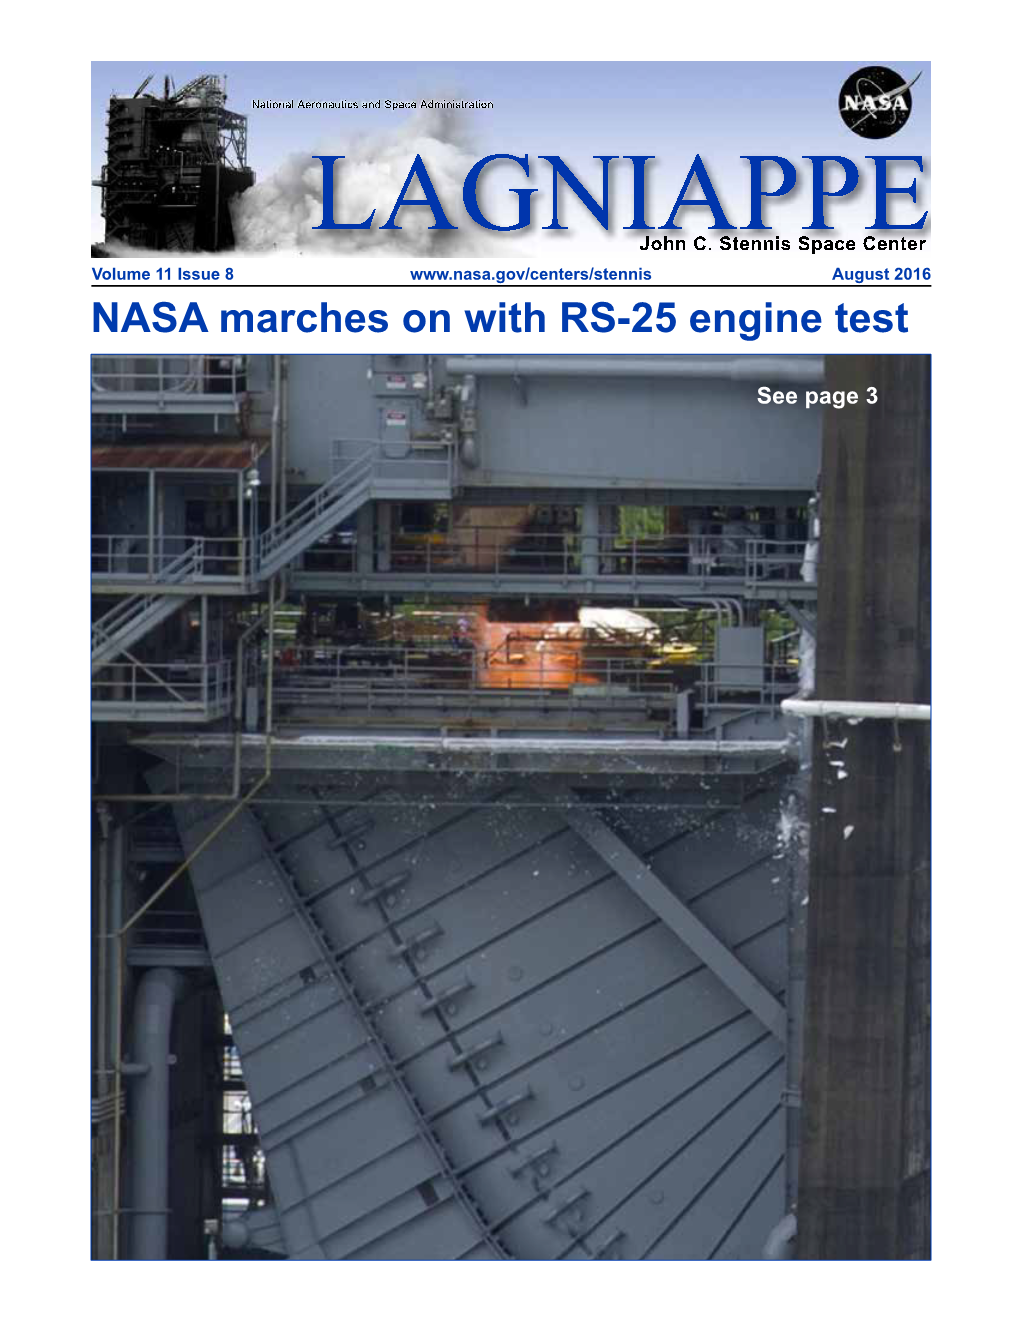 NASA Marches on with RS-25 Engine Test